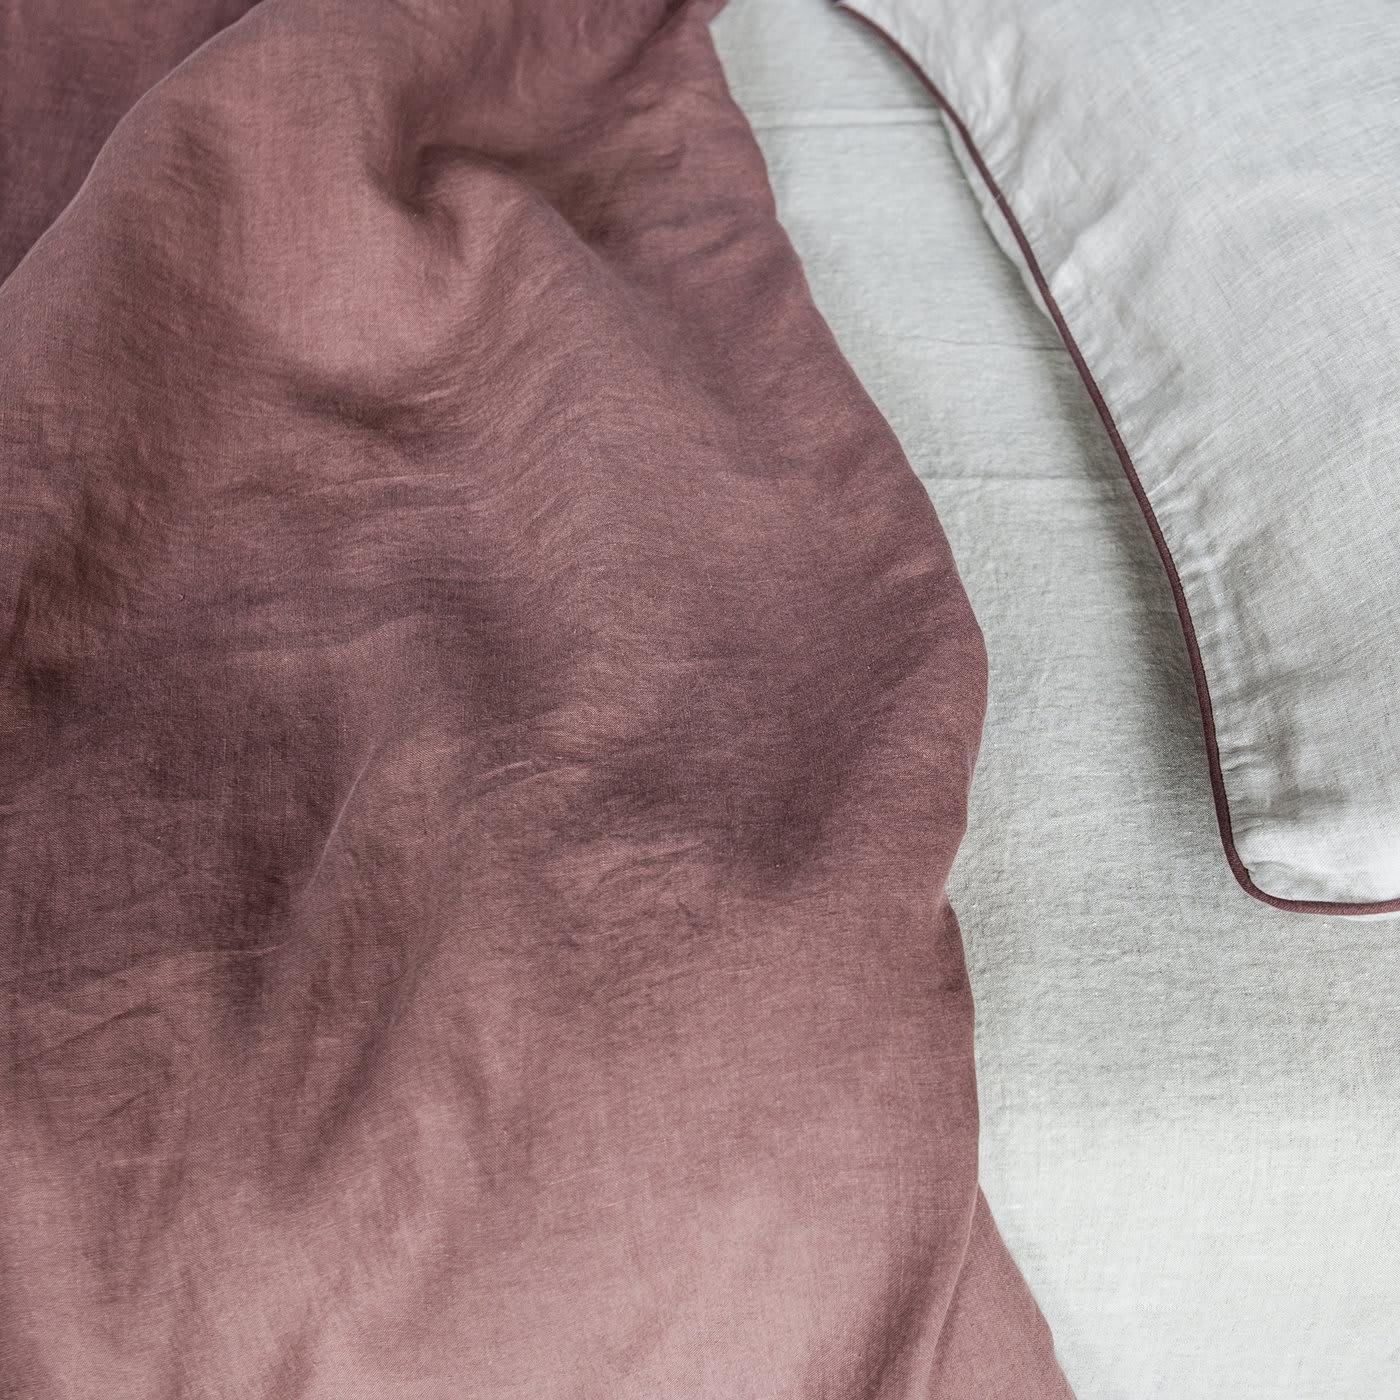 Made with pieces that will give every night a luxurious comfort, this set was crafted by hand in lightweight linen (165 gr/sq m). It comprises a duvet cover and two matching pillowcases in a delicate shade of vintage pink, and a fitted sheet dyed in